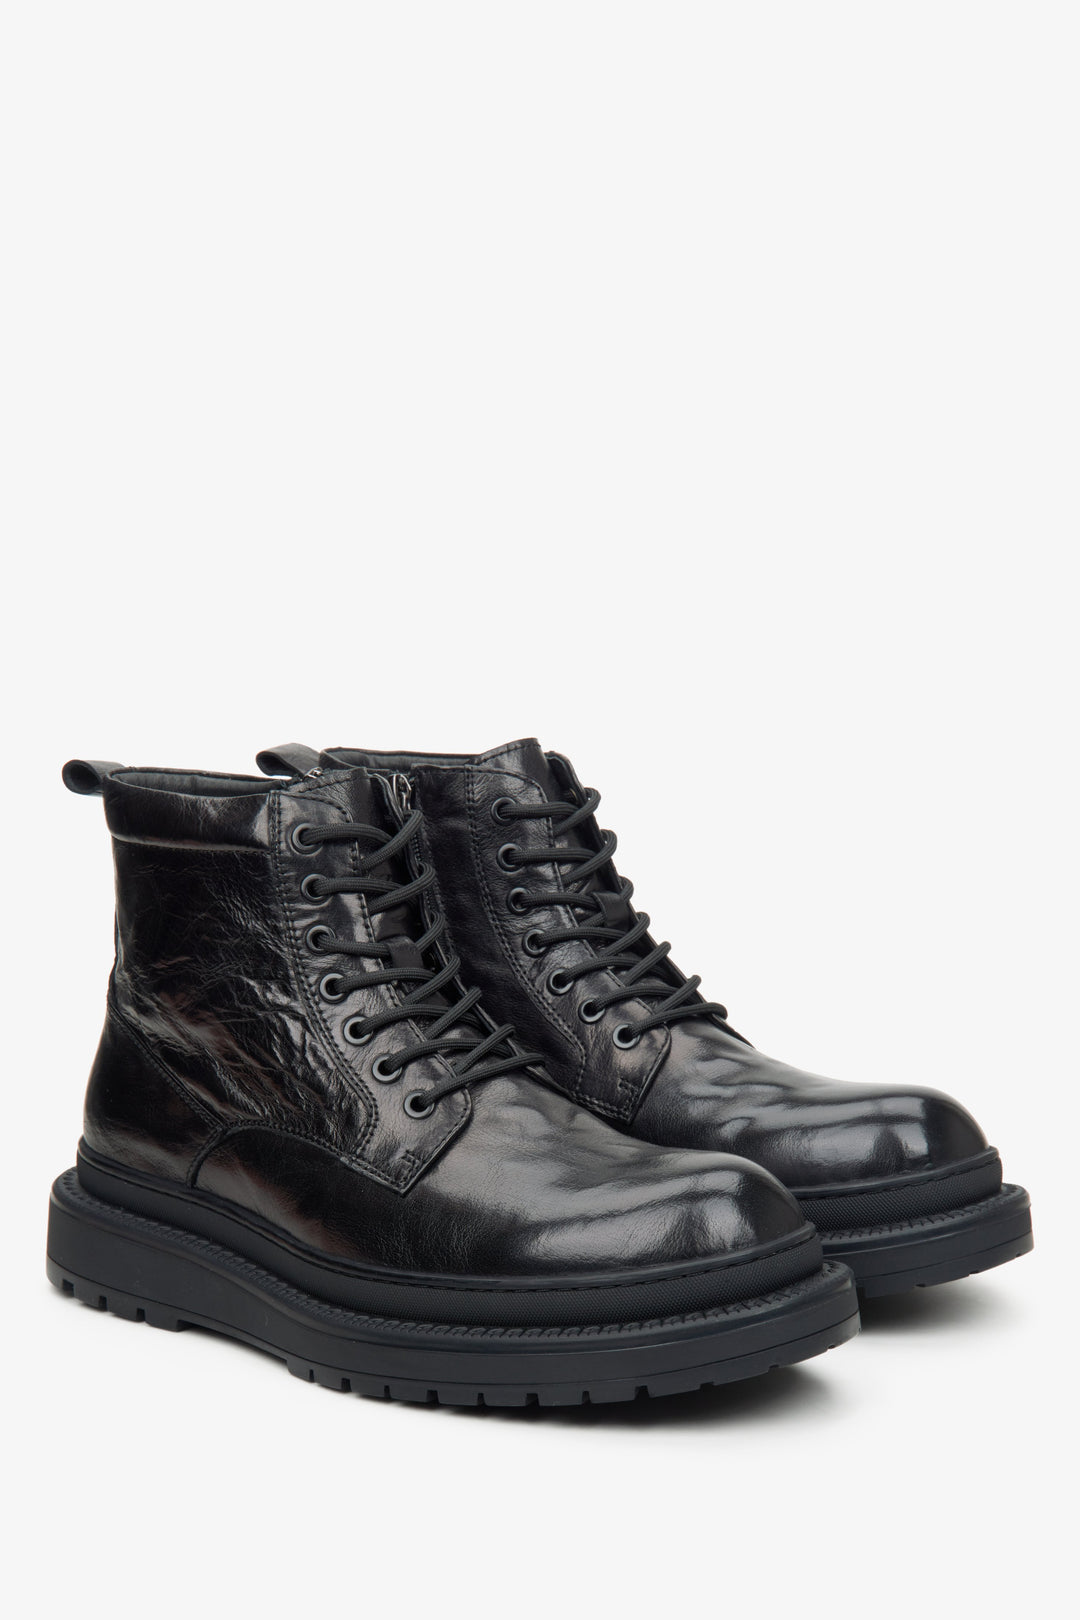 Men's black boots with insulation made of glossy genuine leather by Estro.